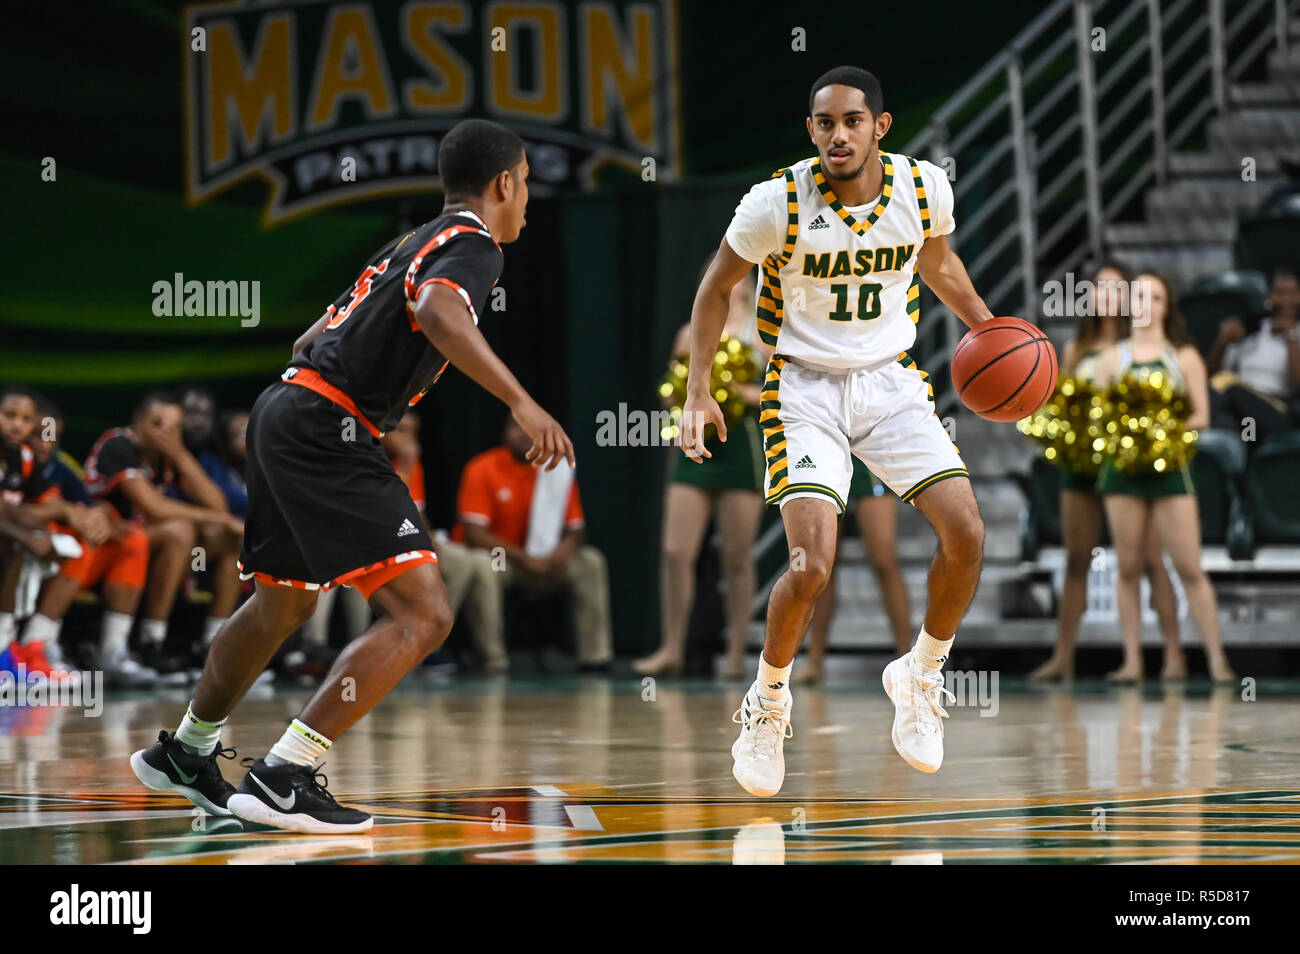 Fairfax, Virginia, USA. 28th Nov, 2018. SHERYWN DEVONISH (5) defends against JAMAL HARTWELL II (10) during the game held at Eaglebank Arena in Fairfax, Virginia. Credit: Amy Sanderson/ZUMA Wire/Alamy Live News Stock Photo